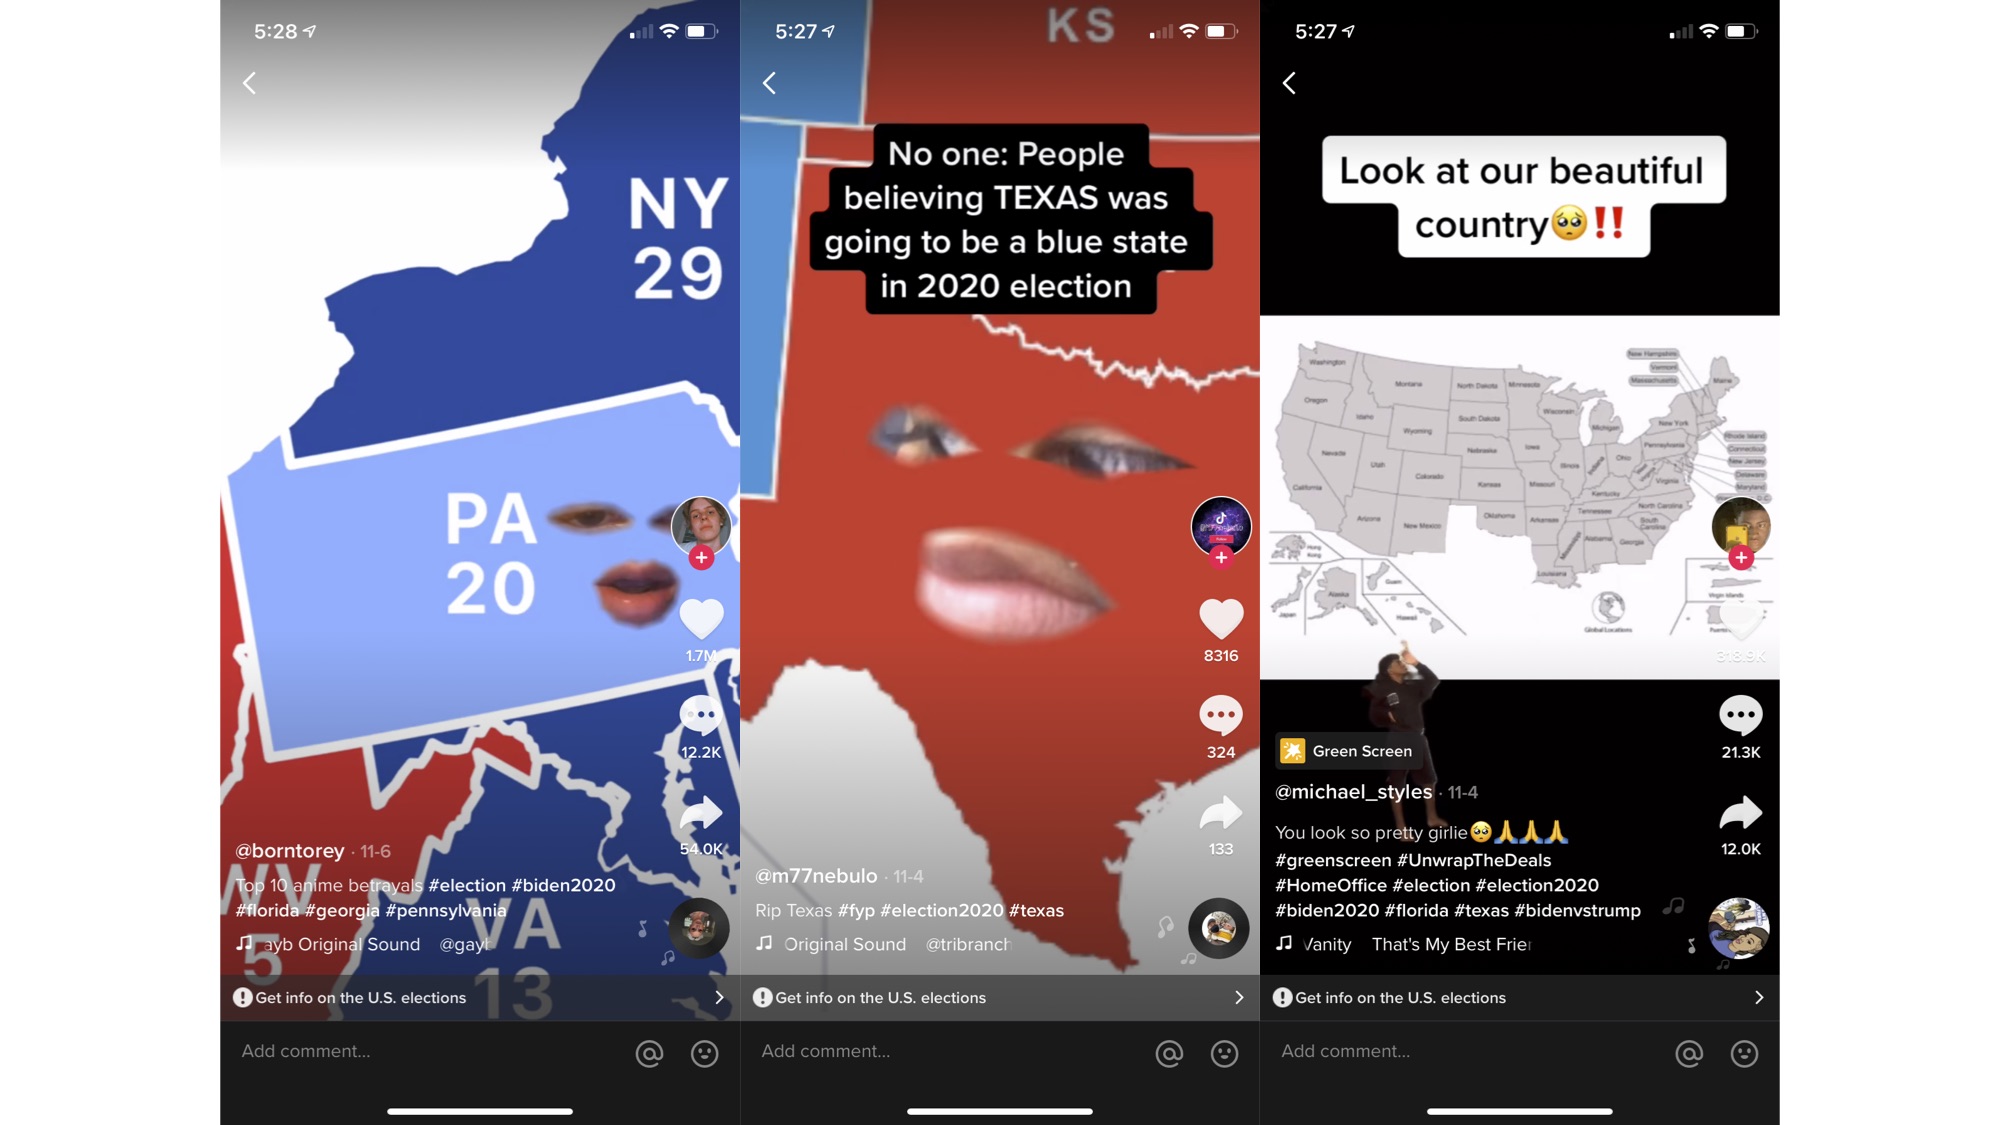 Democrat or Republican, Americans on TikTok find unity in the faults of our political system.